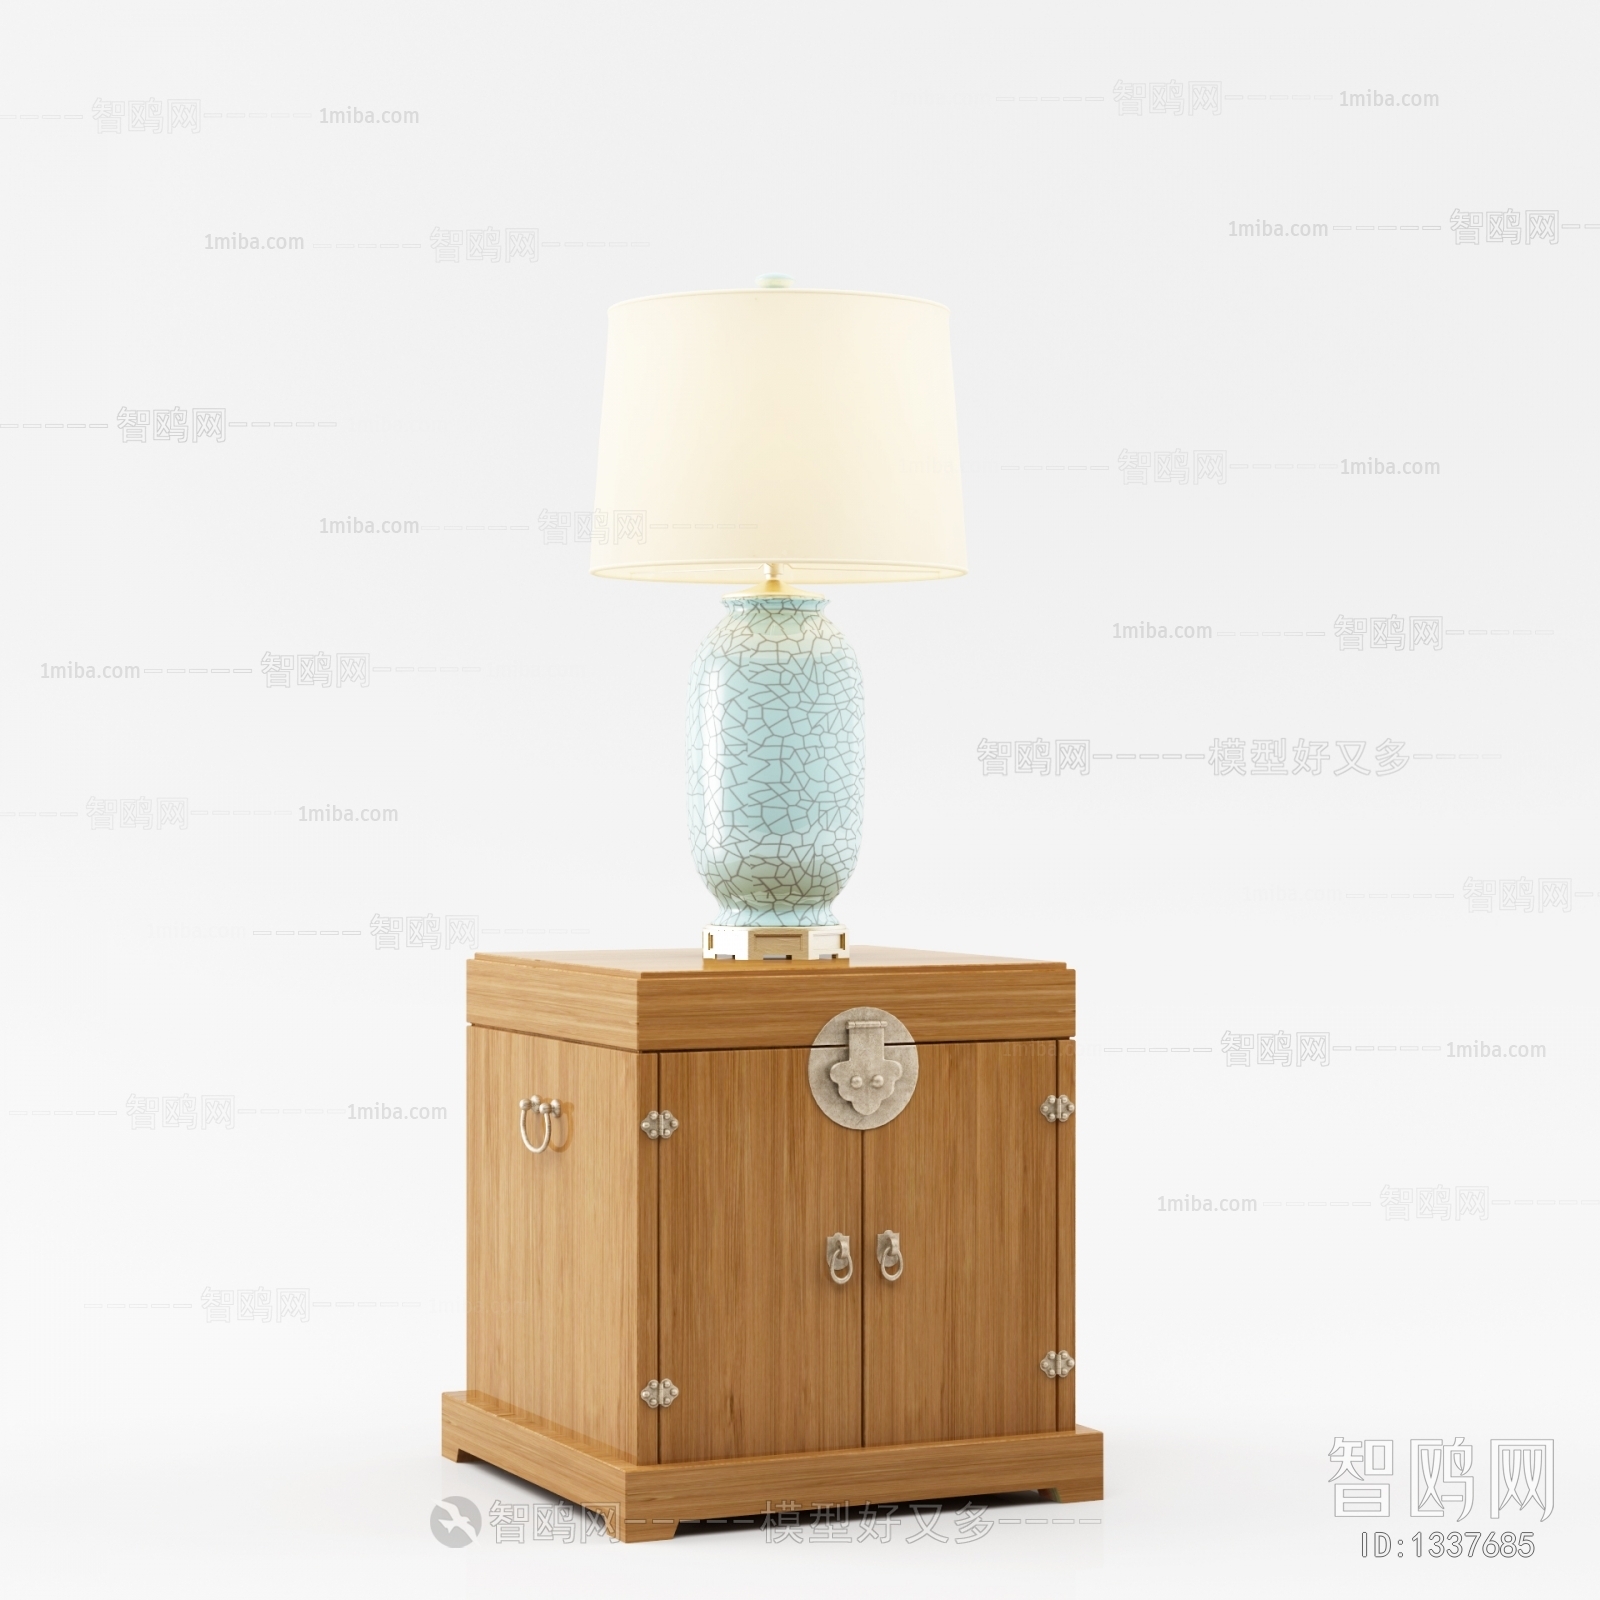 Chinese Style Table Lamp